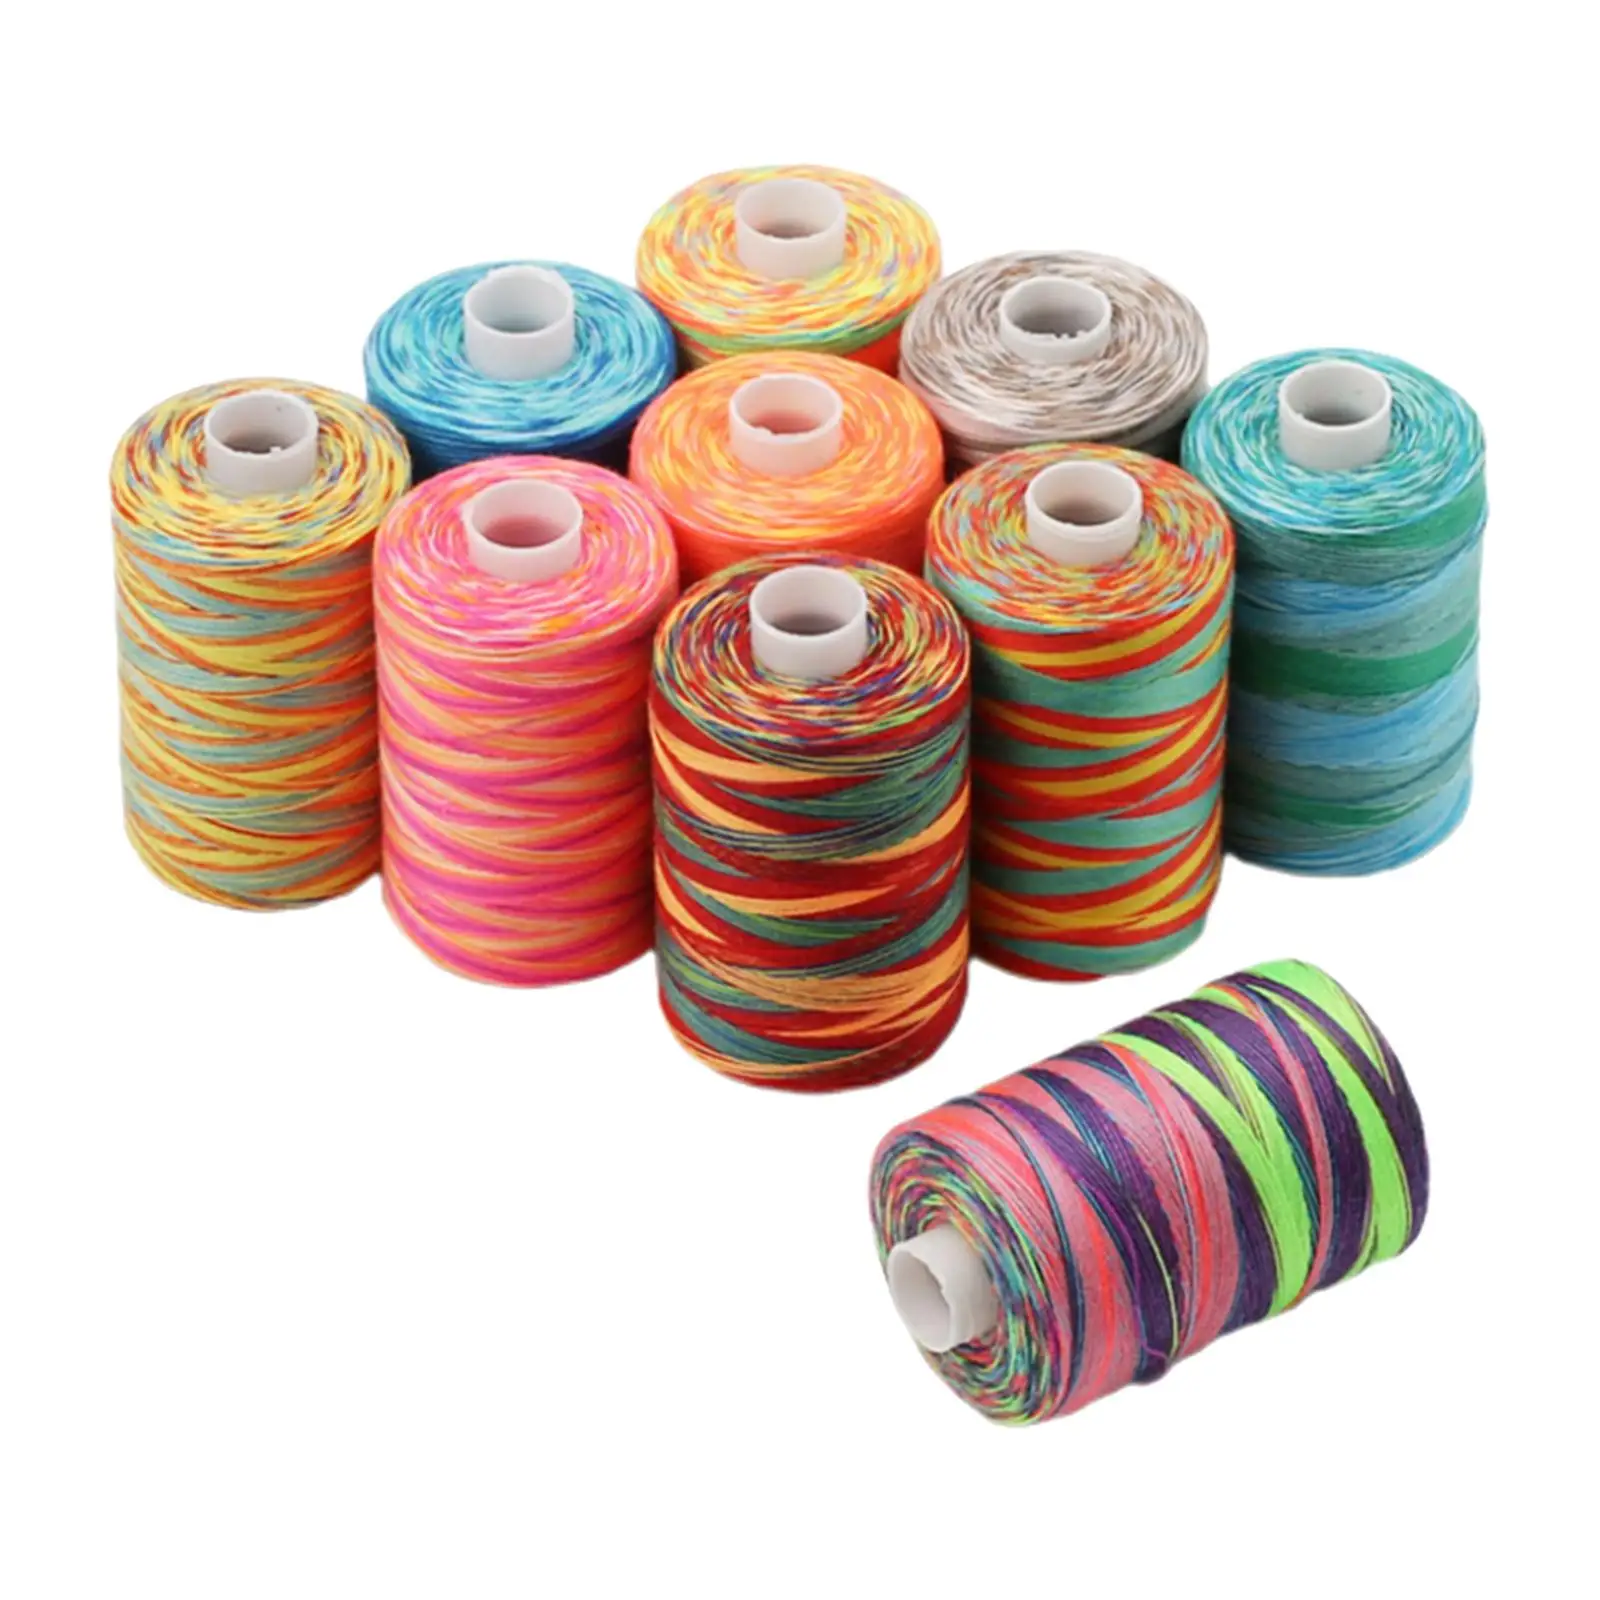 10Pcs High Tenacity Sewing Thread, Spool Sewing Thread Thread Kit for Overlock, Patchwork, Quilting, Crocheting, DIY Sewing